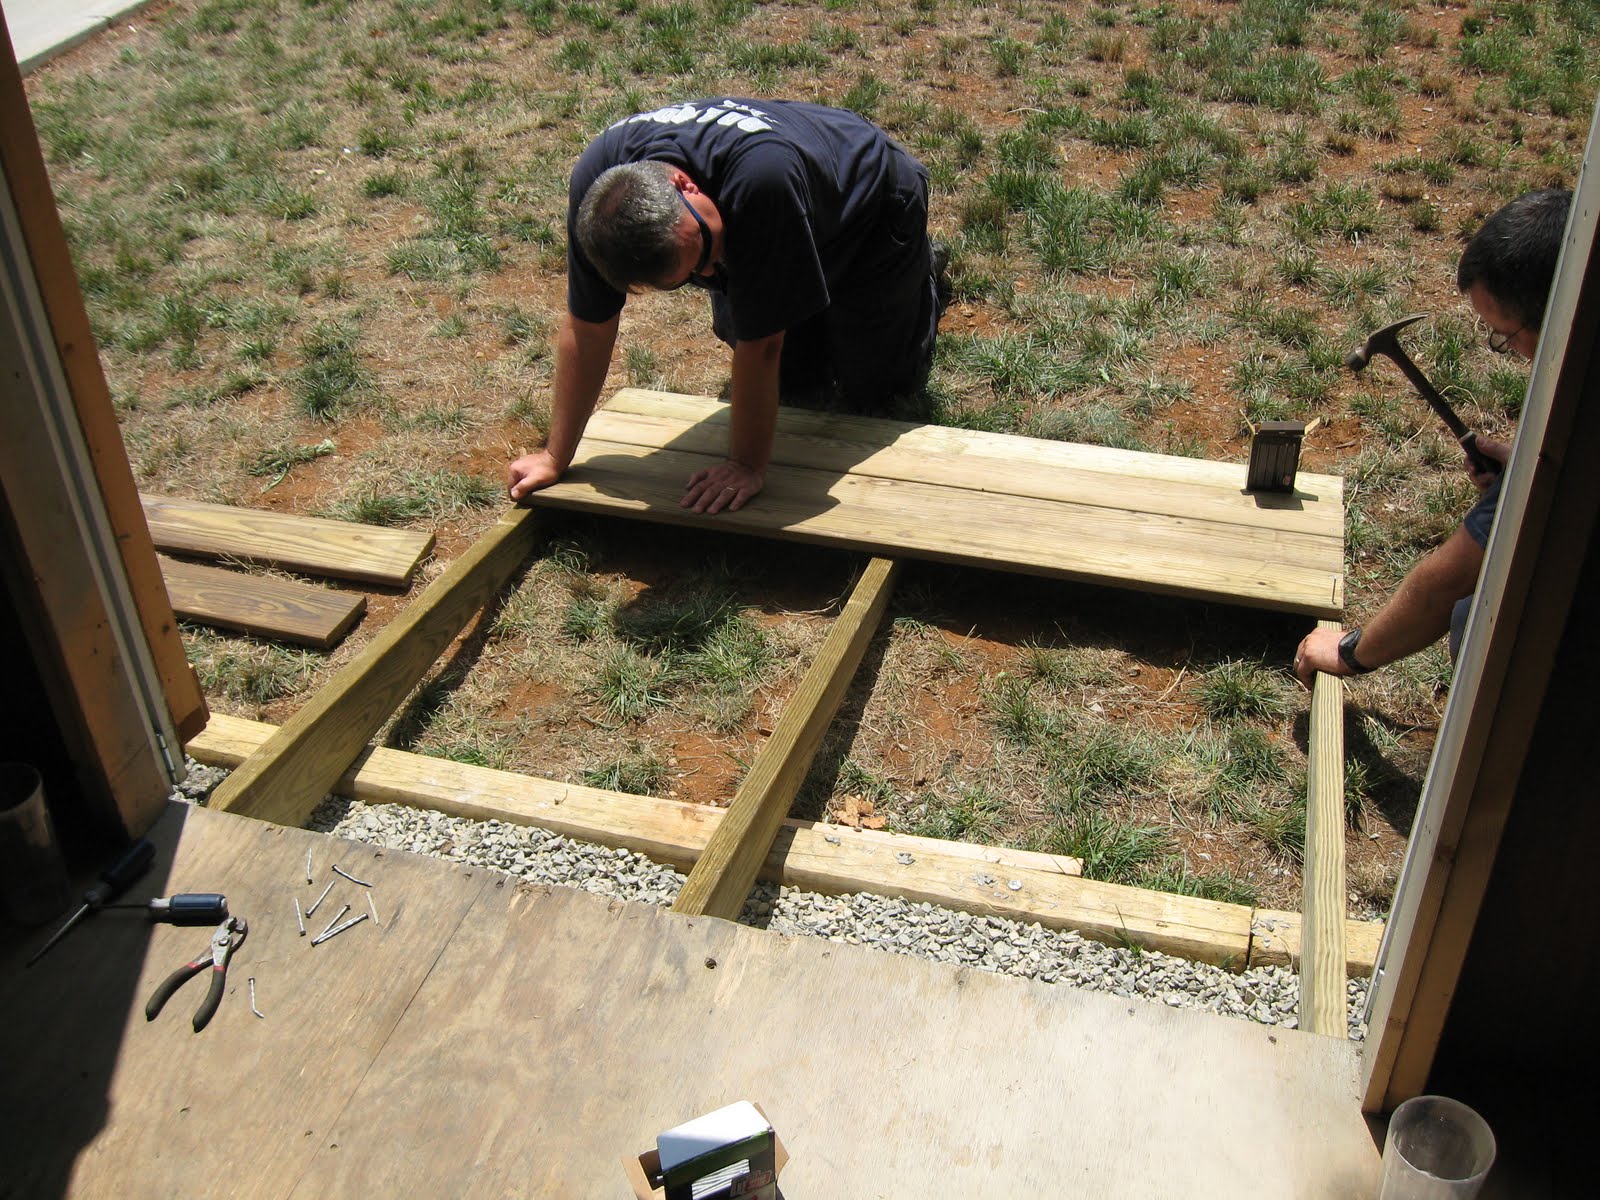 curtis: pdf plans how do you build a wood ramp for a